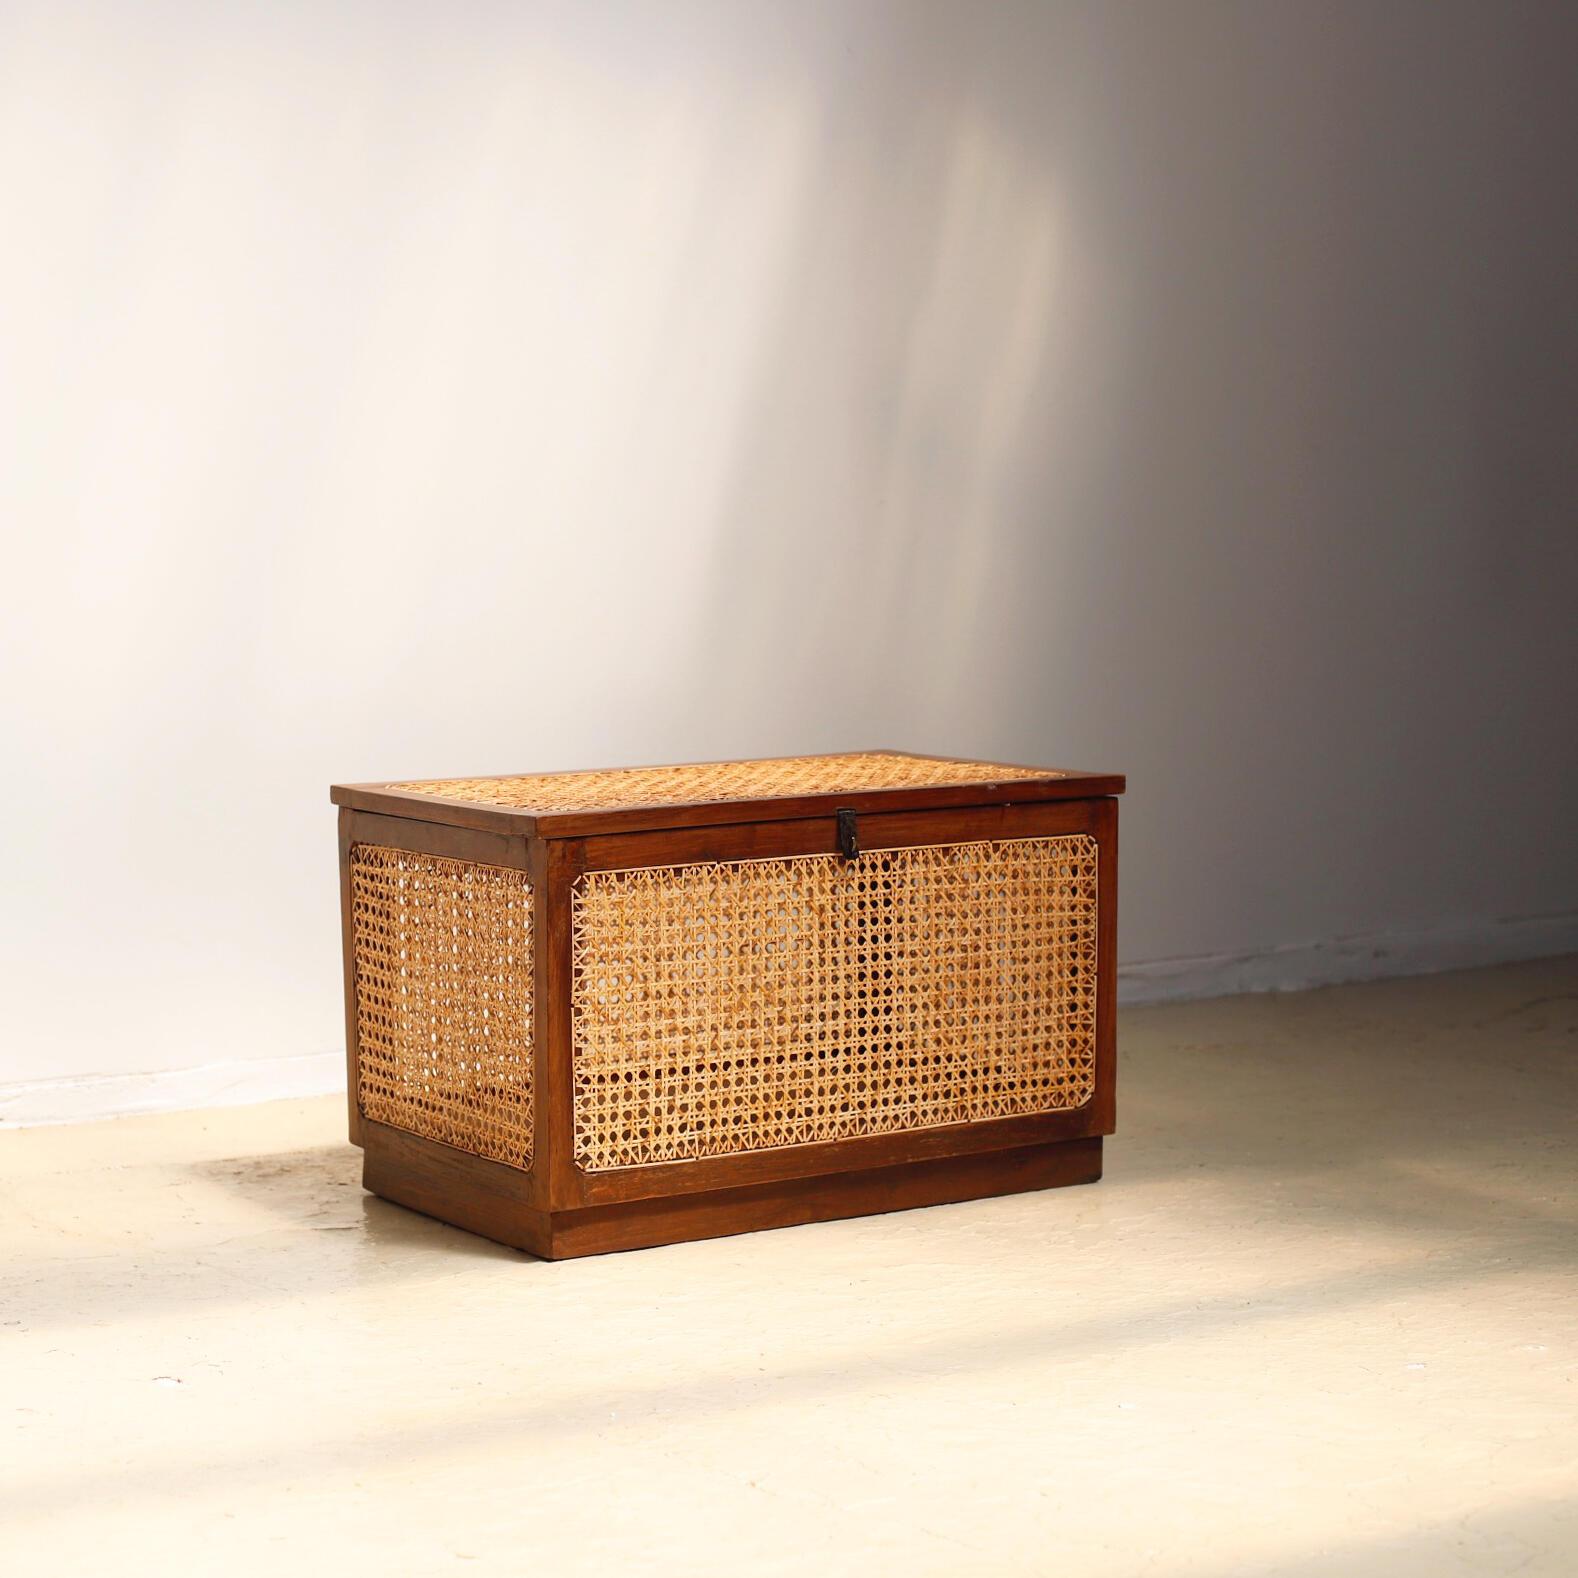 Indian Pierre Jeanneret Linen Chest from the M.L.A. Flats Building, Chandigarh